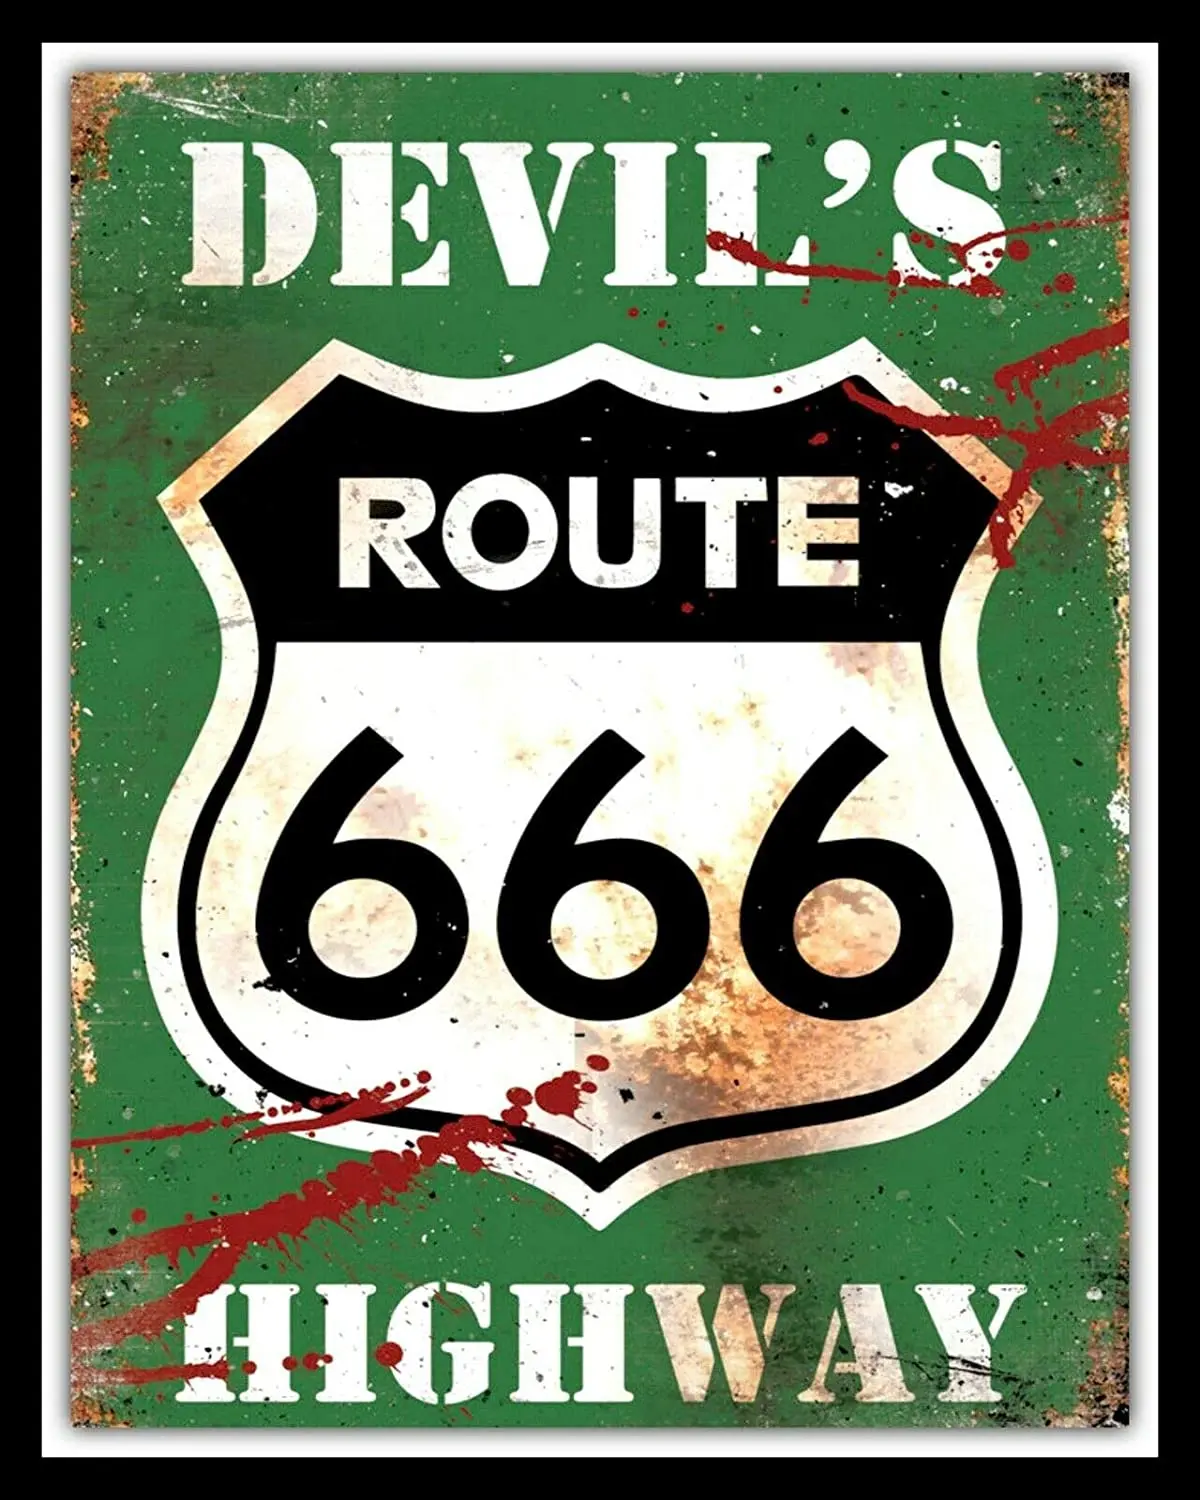 

Original Metal Sign Co Wall Sign Route 66 The Mother Road Classic Pin Up 8" x 6" Retro Wall Home Bar Pub Vintage Cafe Decor,8x12